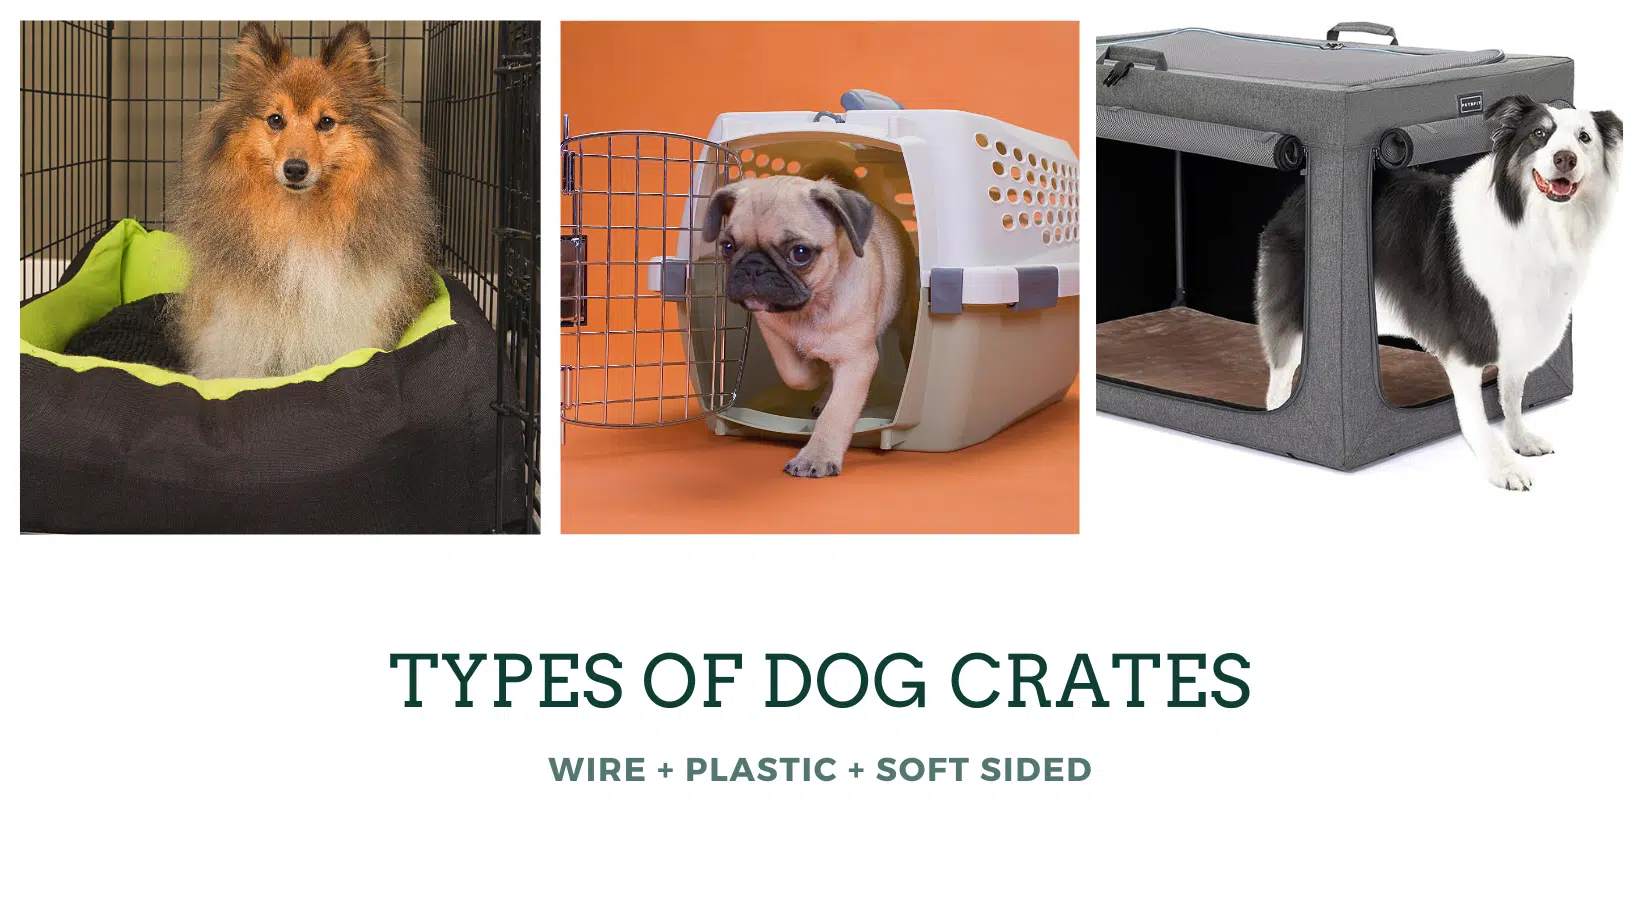 Three types of dog crates, plastic, wire, soft sided